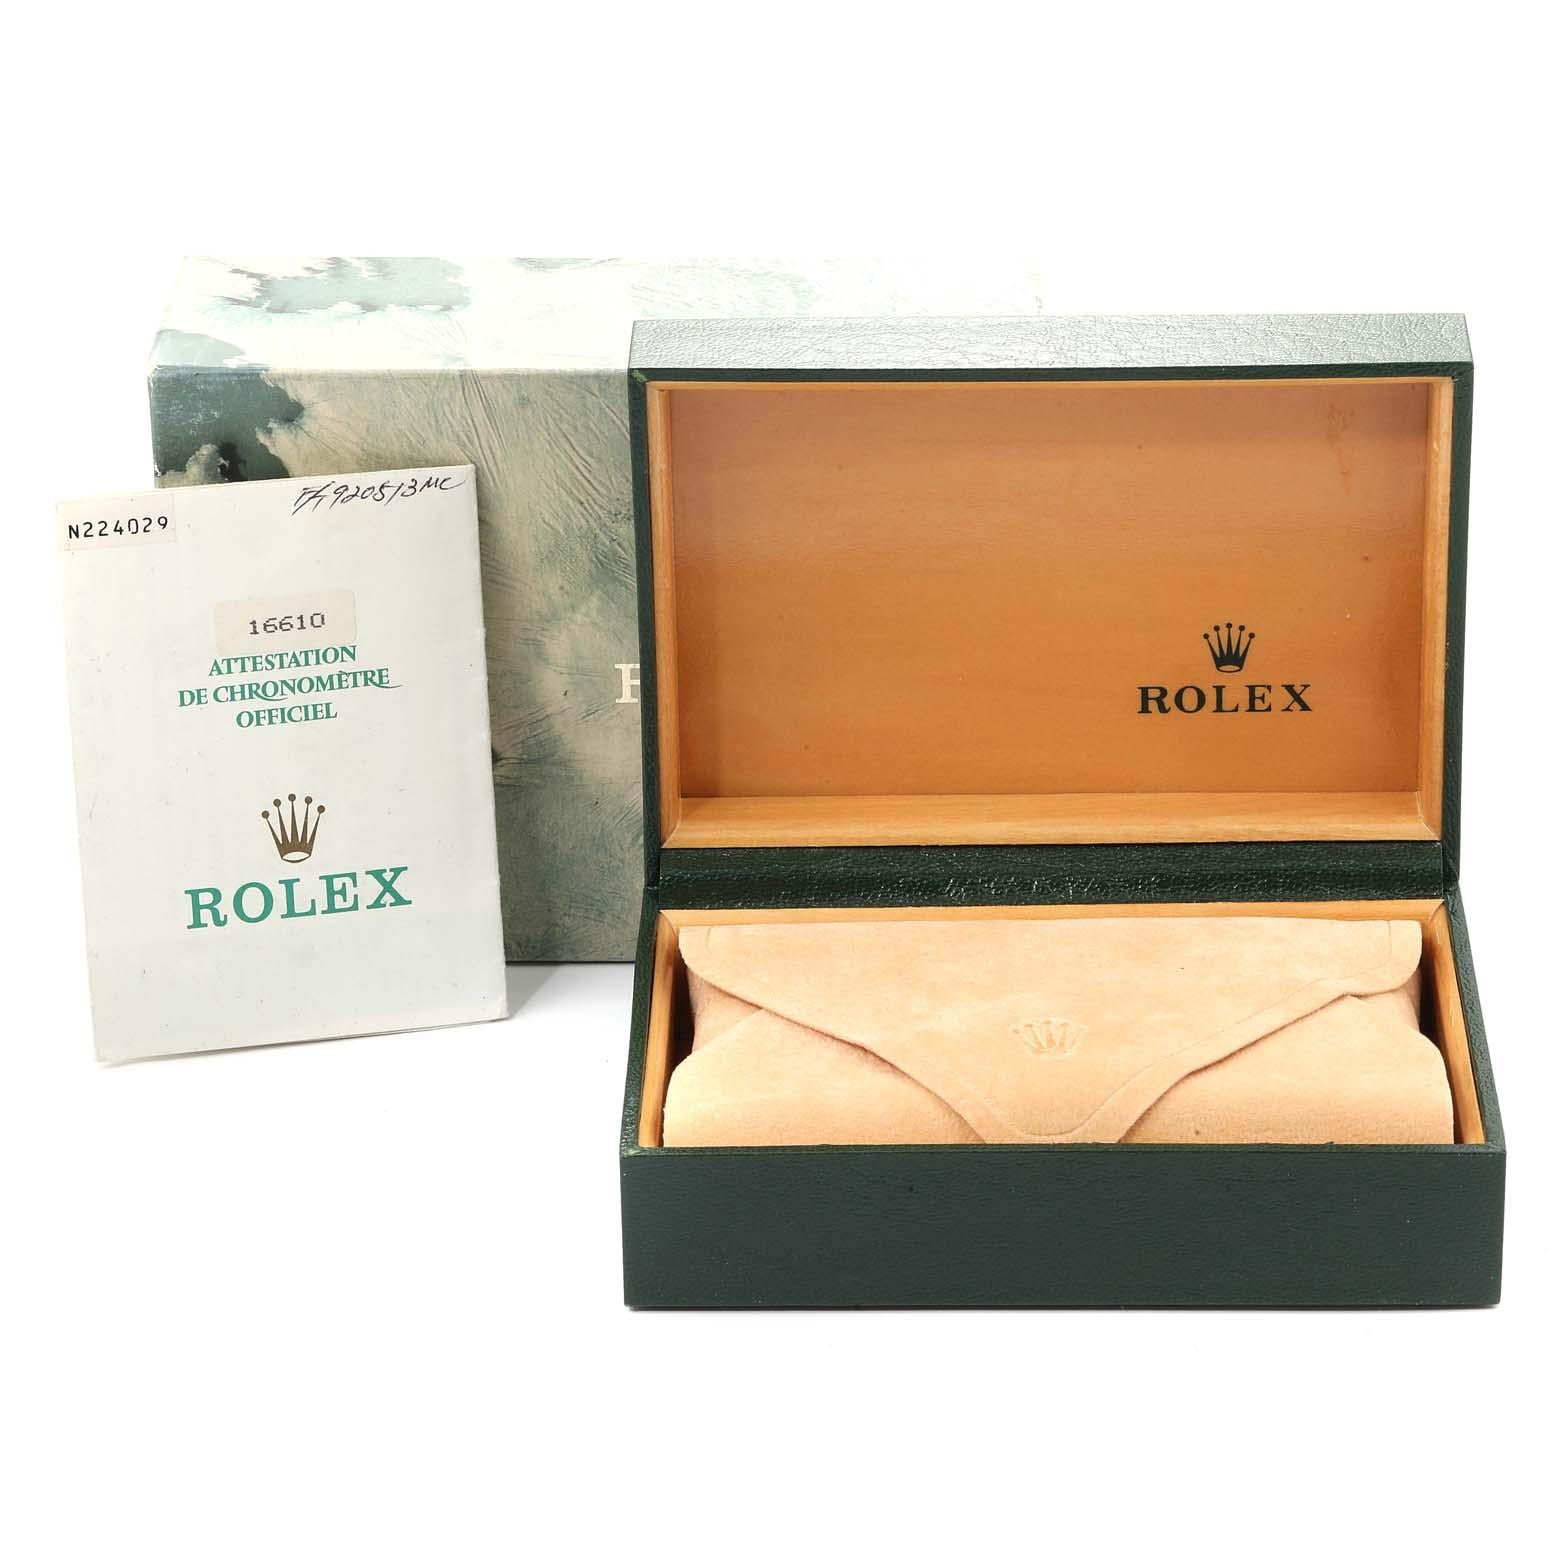 Rolex Submariner Date Stainless Steel Men's Watch 16610 Box Papers 9